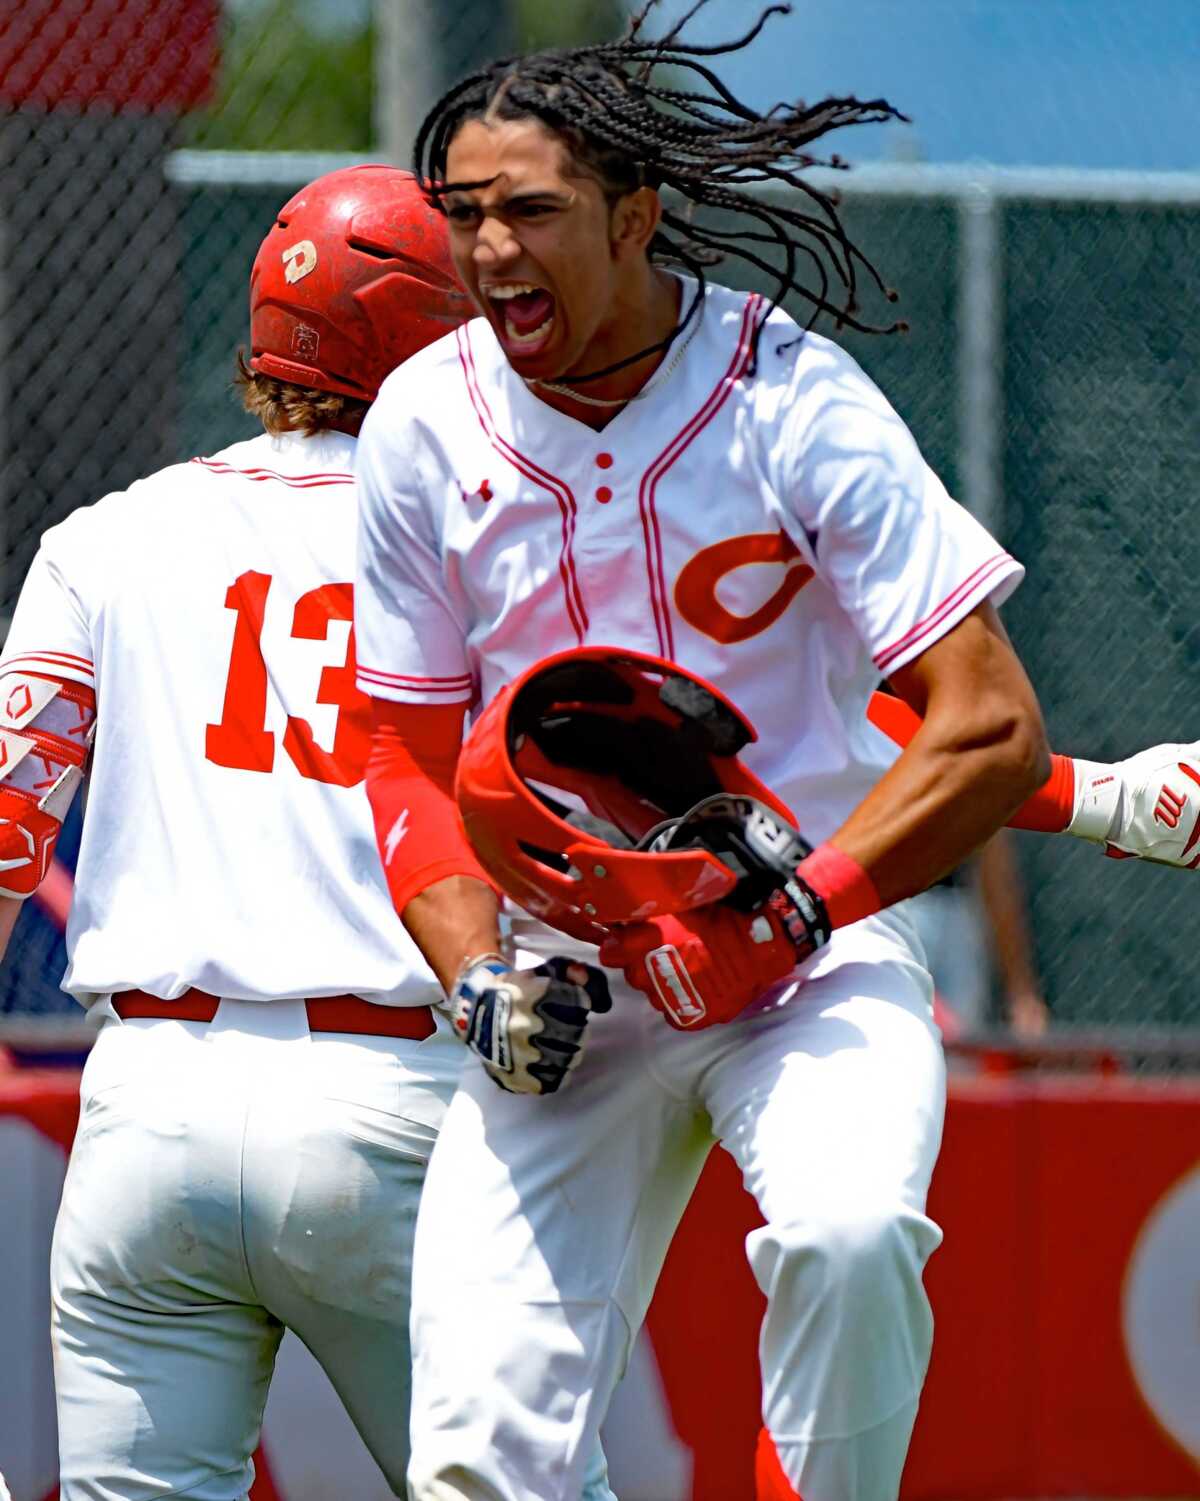 Freshman Anthony Murphy of Corona celebrates a walk-off win over top-seeded Notre Dame on Friday.